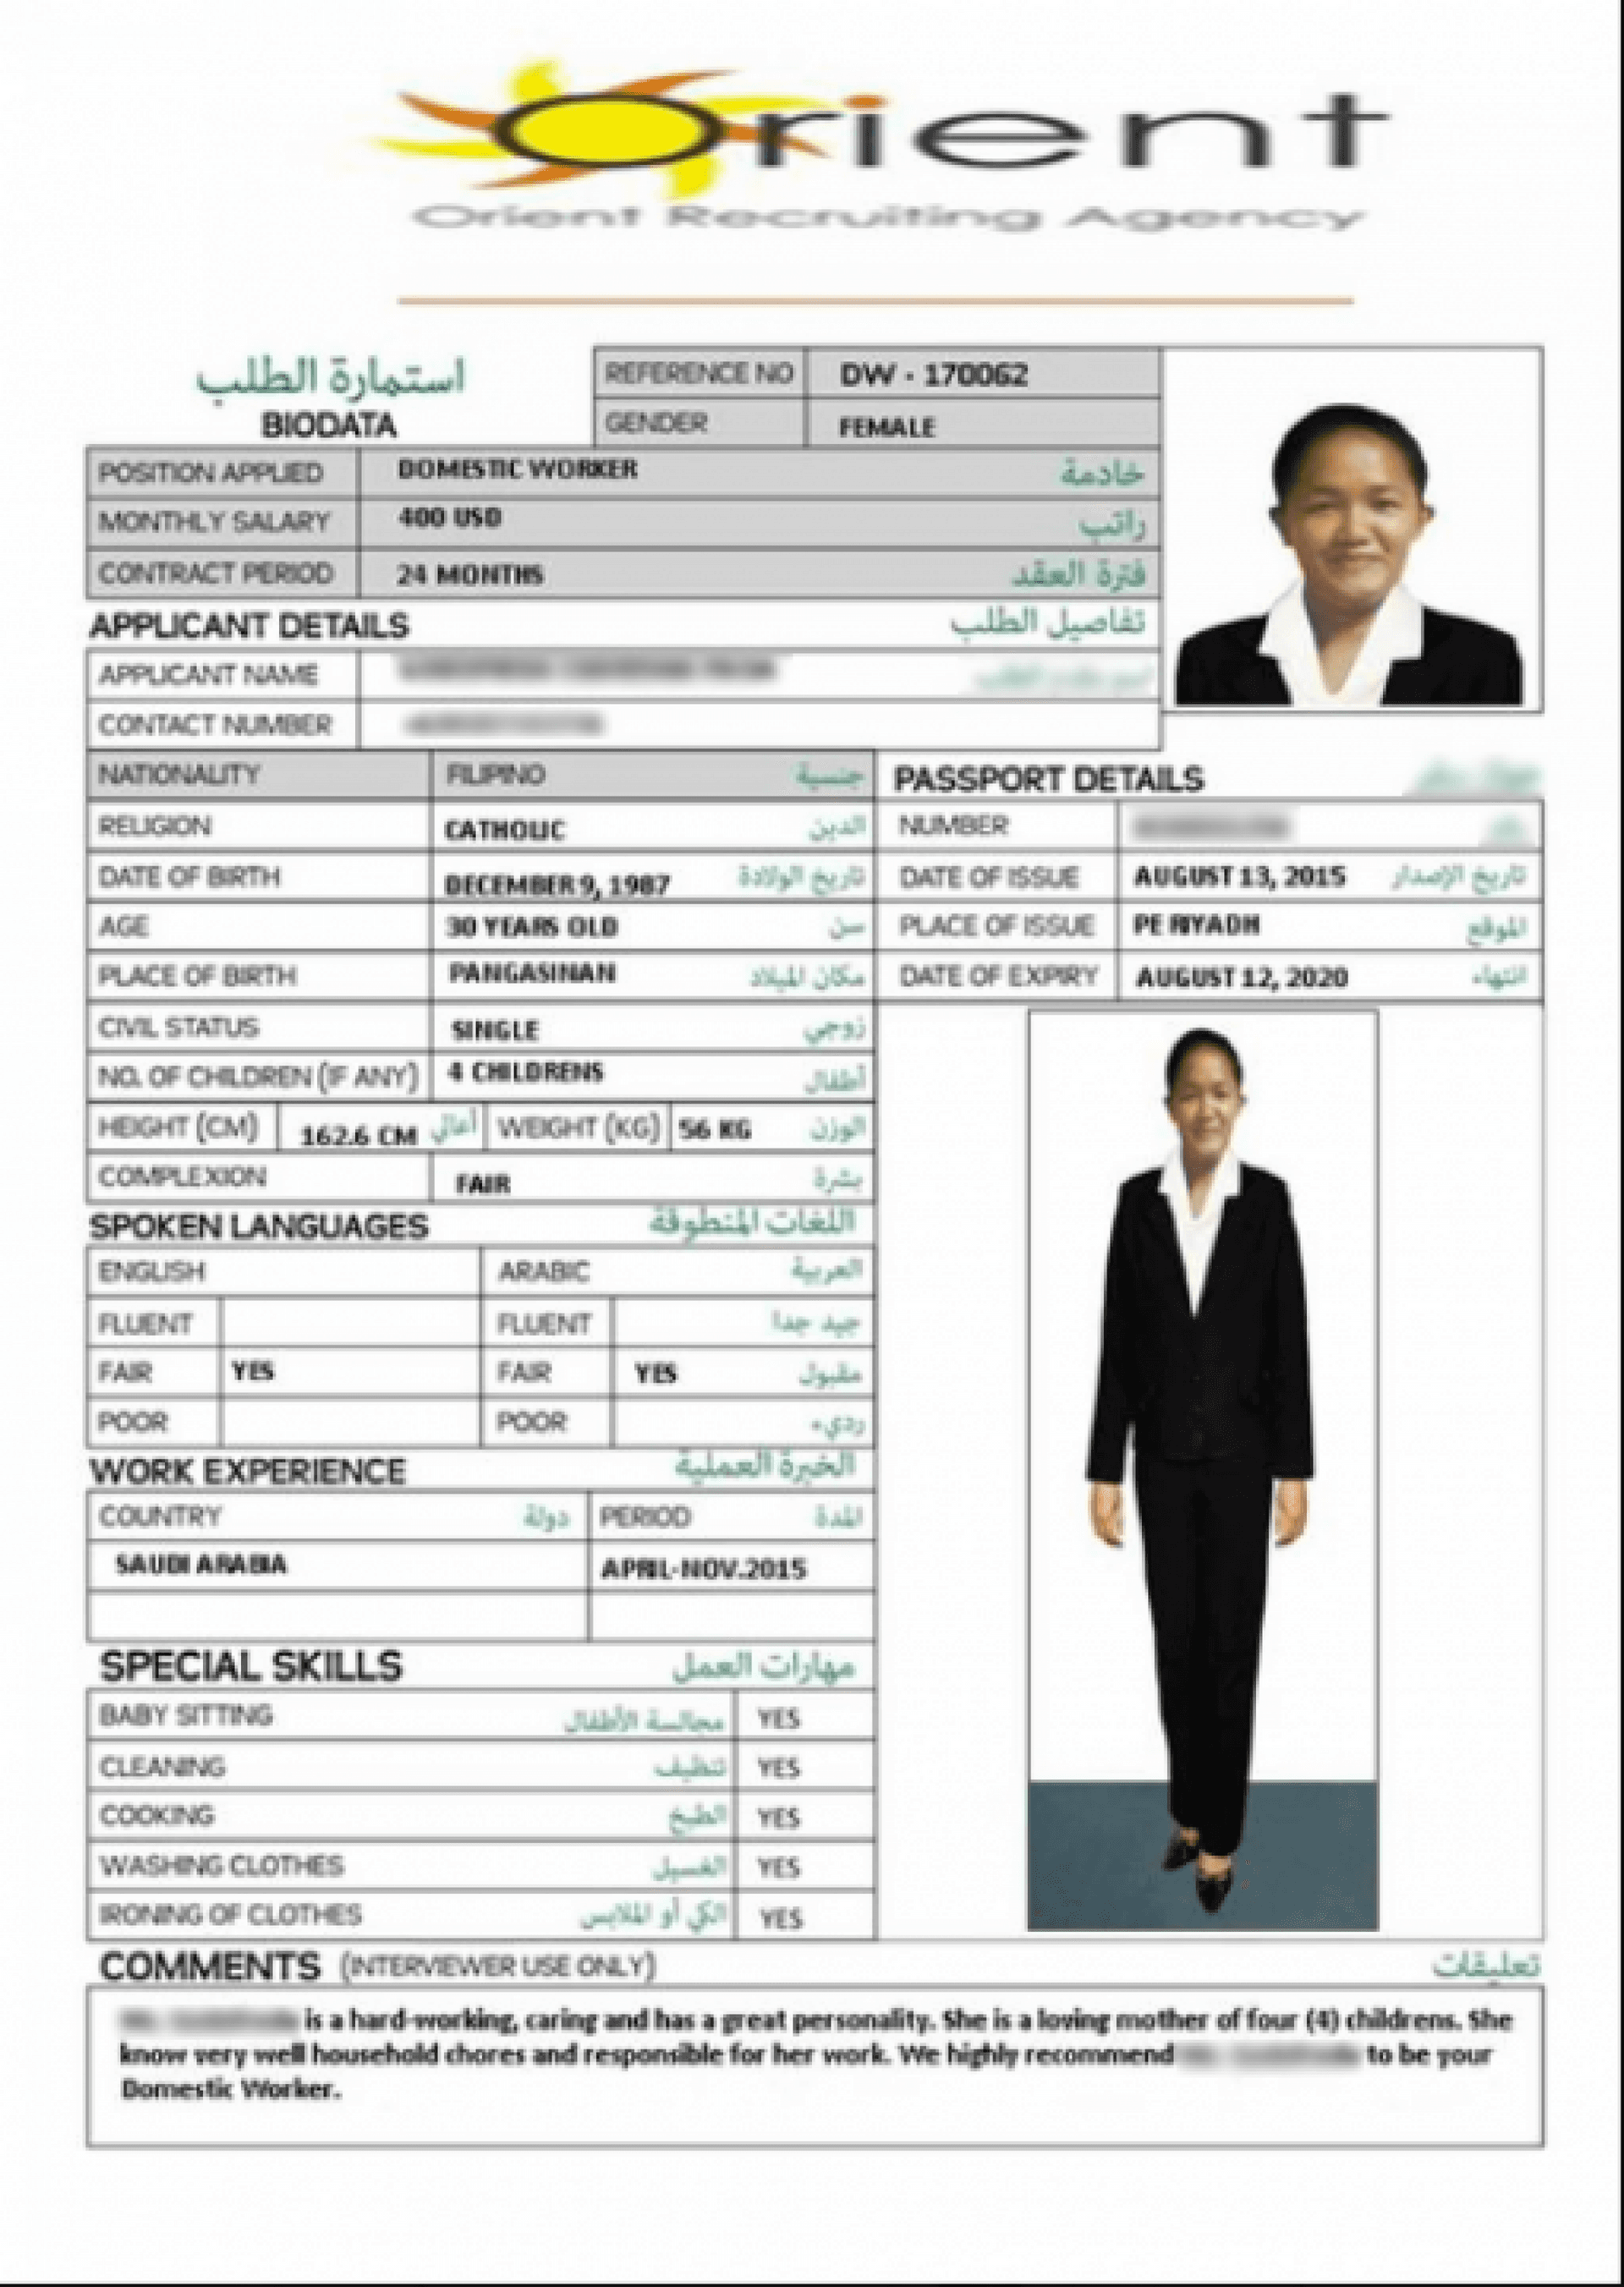 Screenshot of biodata ads from domestic worker recruiting agency.